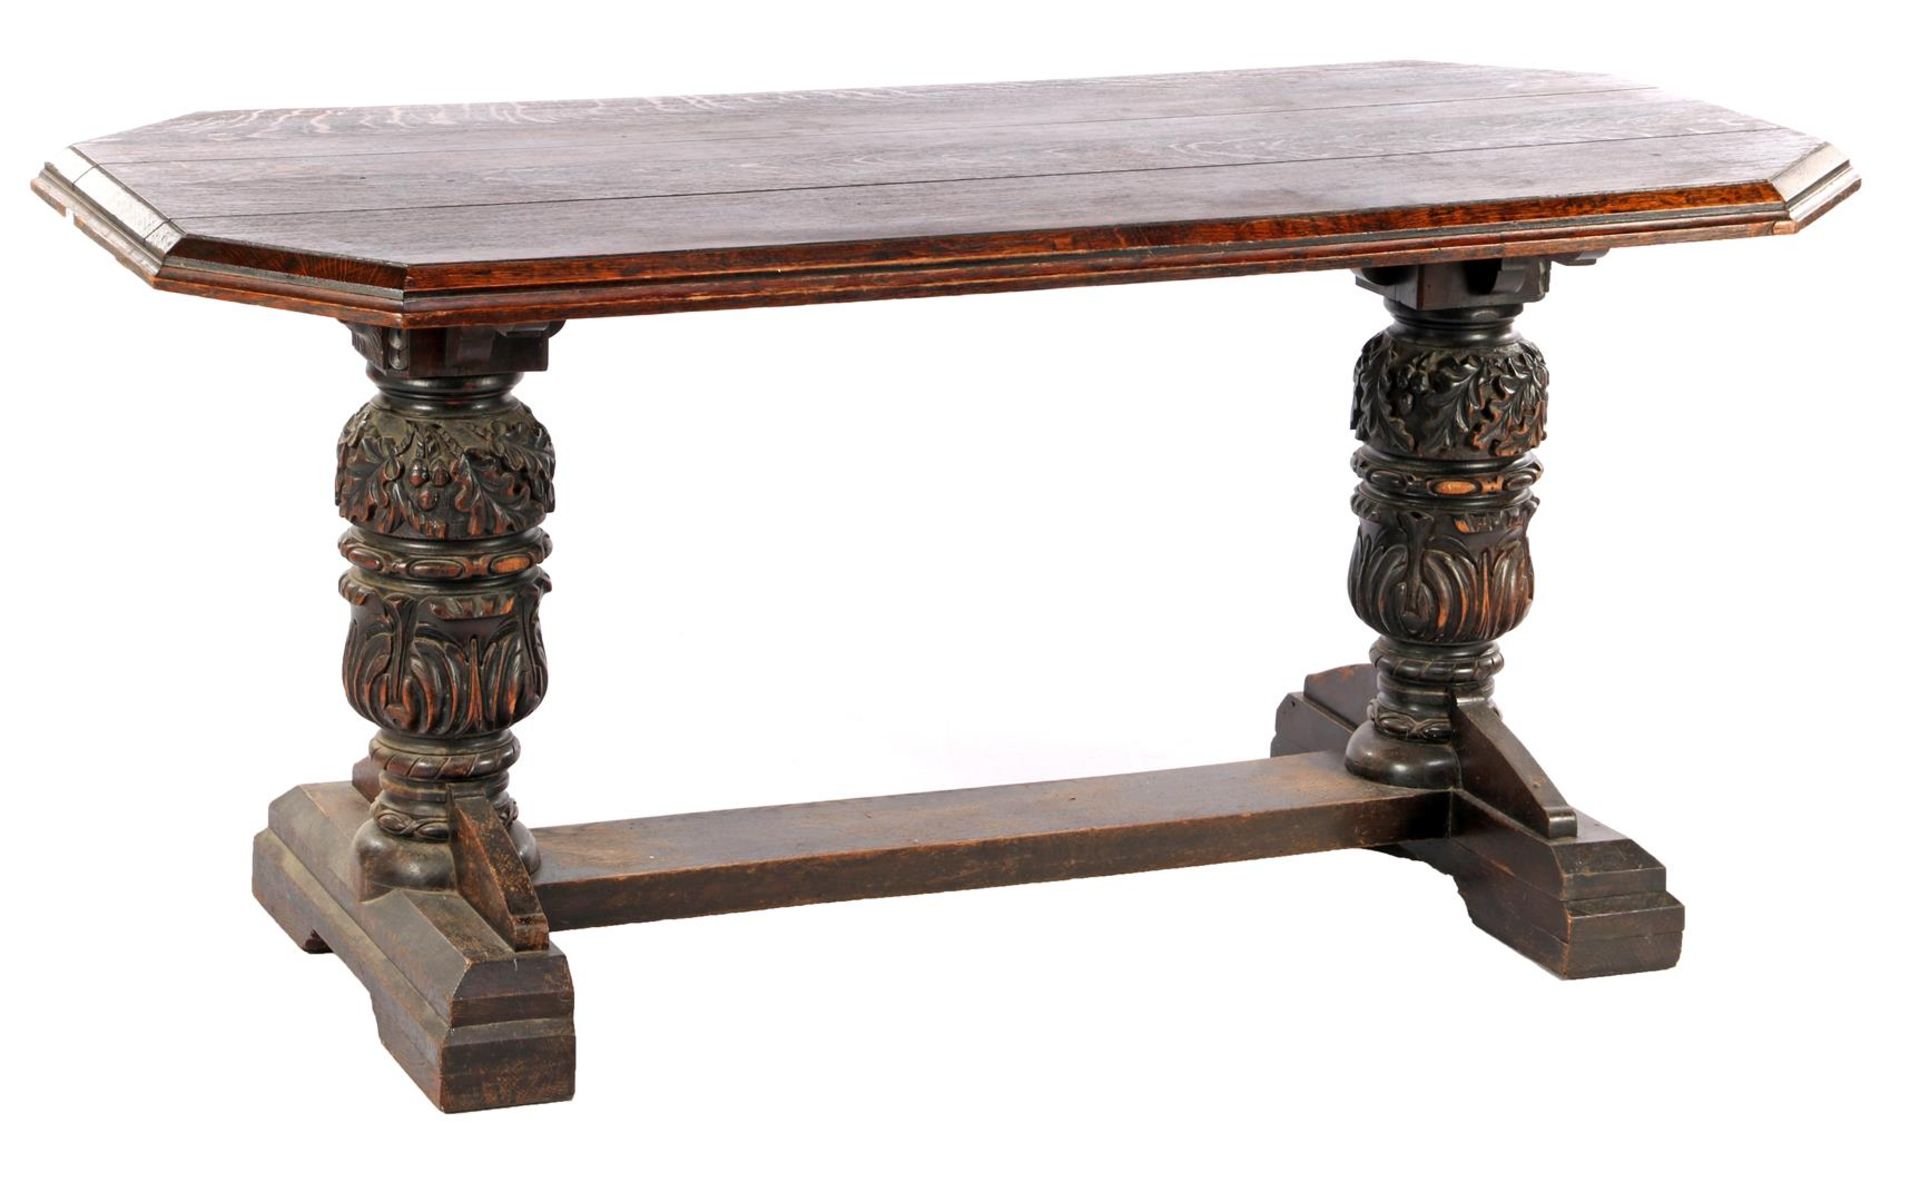 Oak monastery table with richly decorated legs